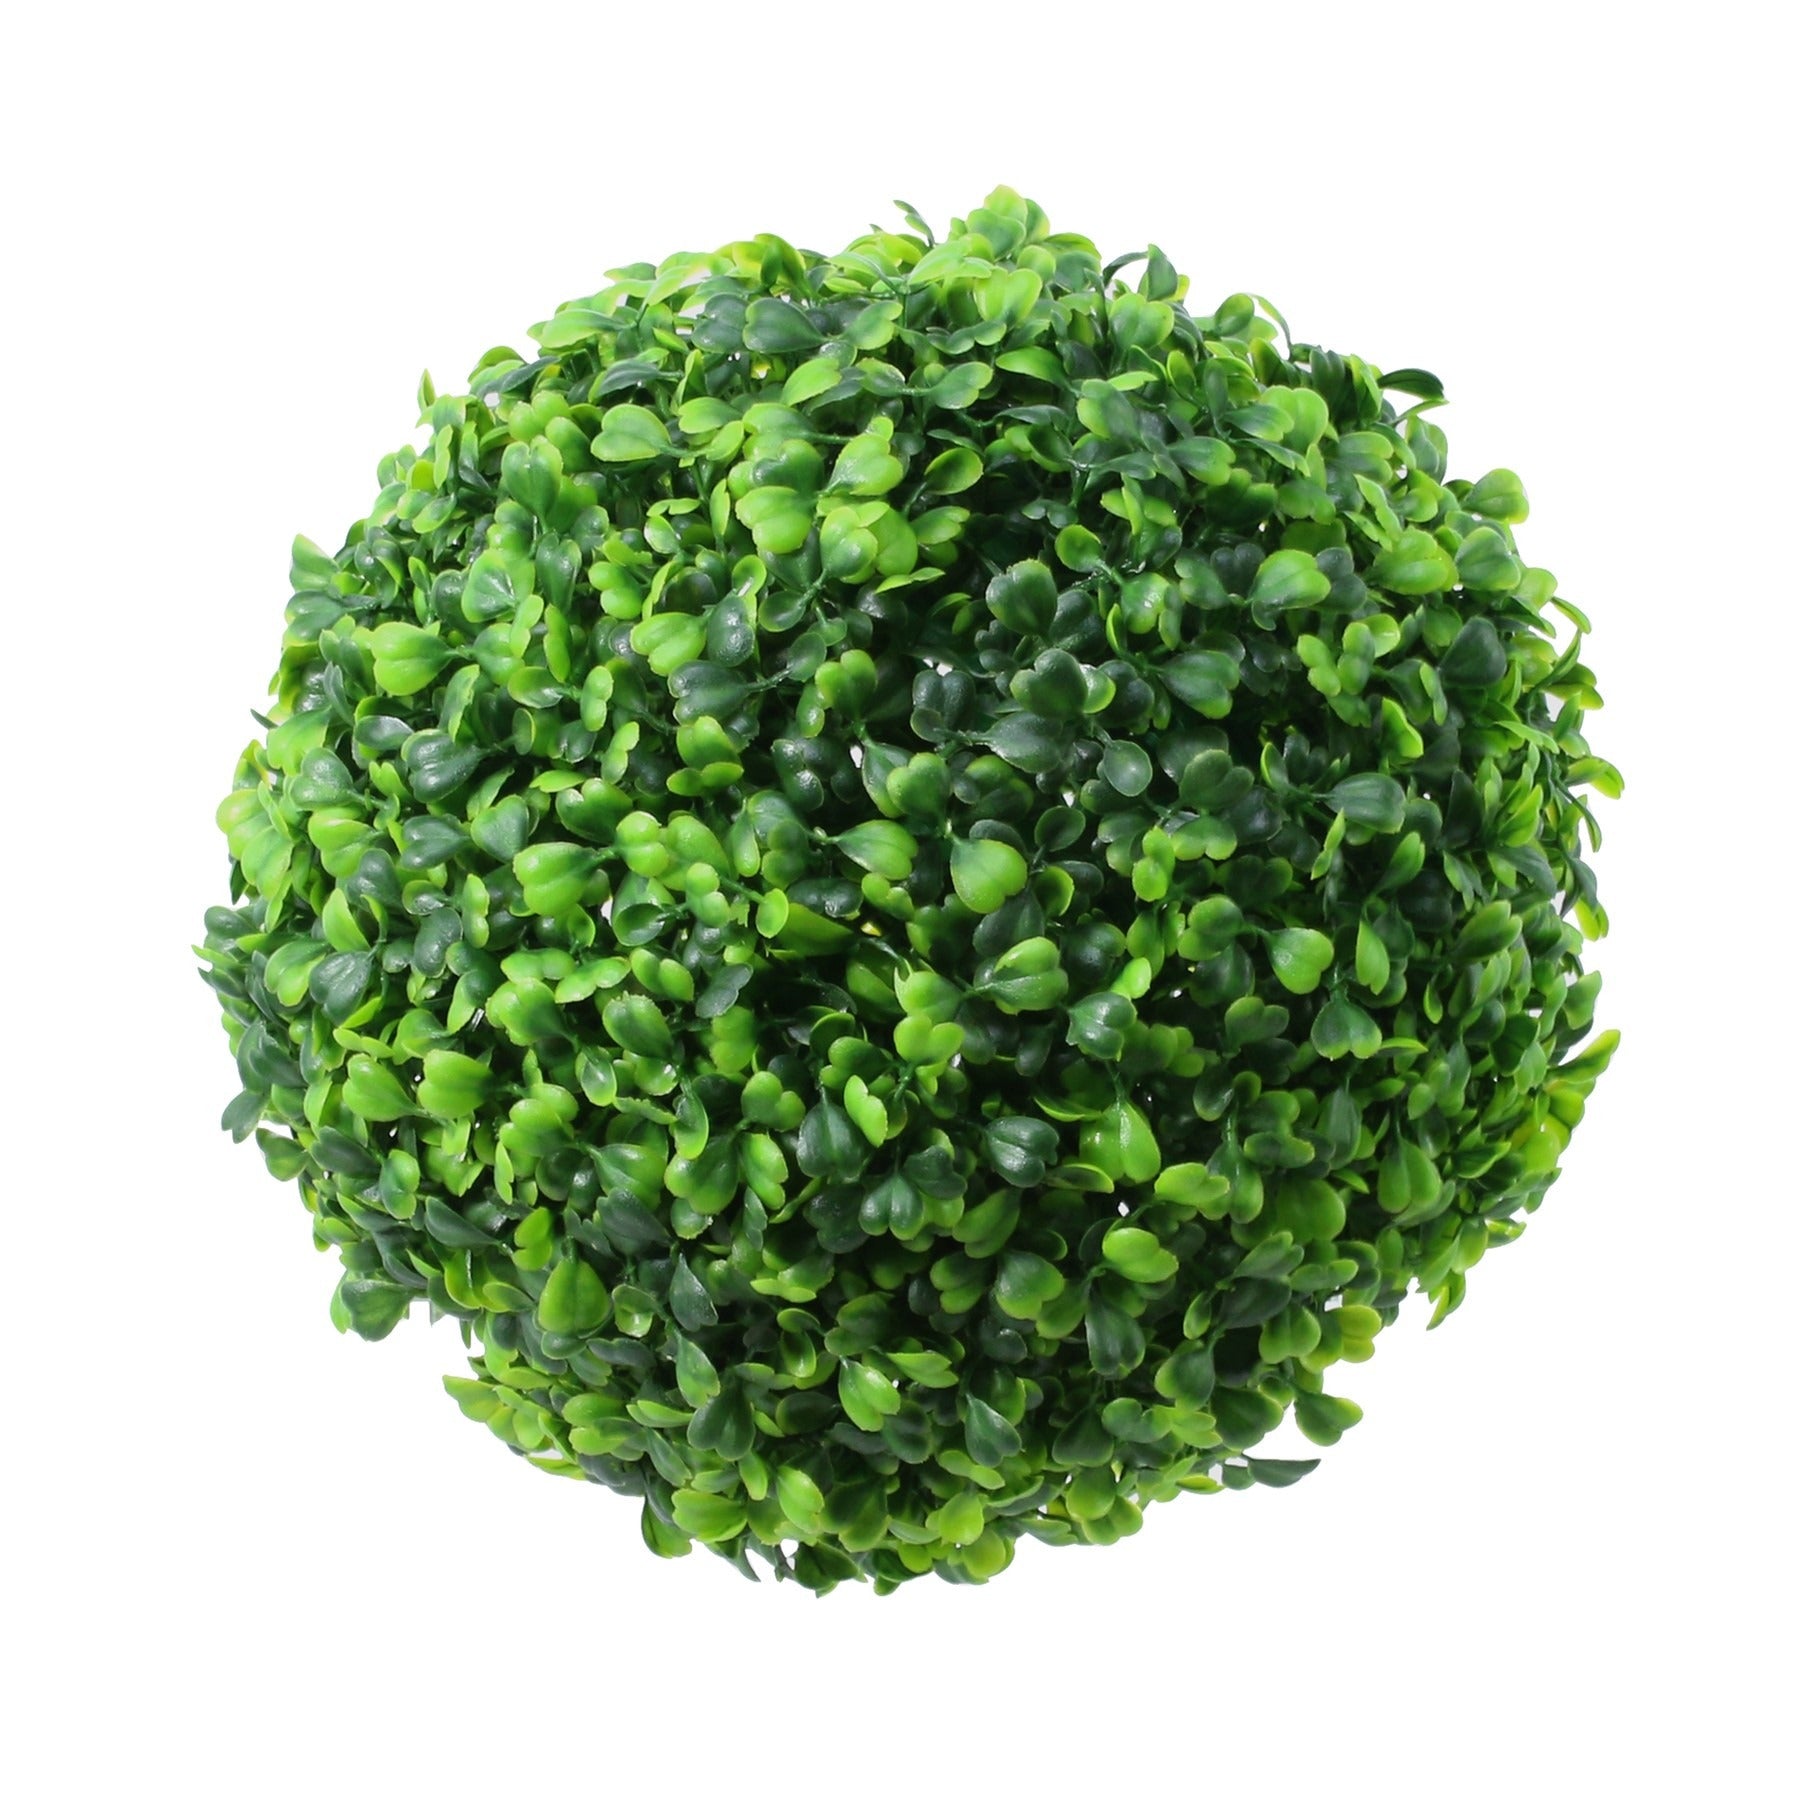 View Exterior UV Resistant Buxus Greenery Ball 35cm information